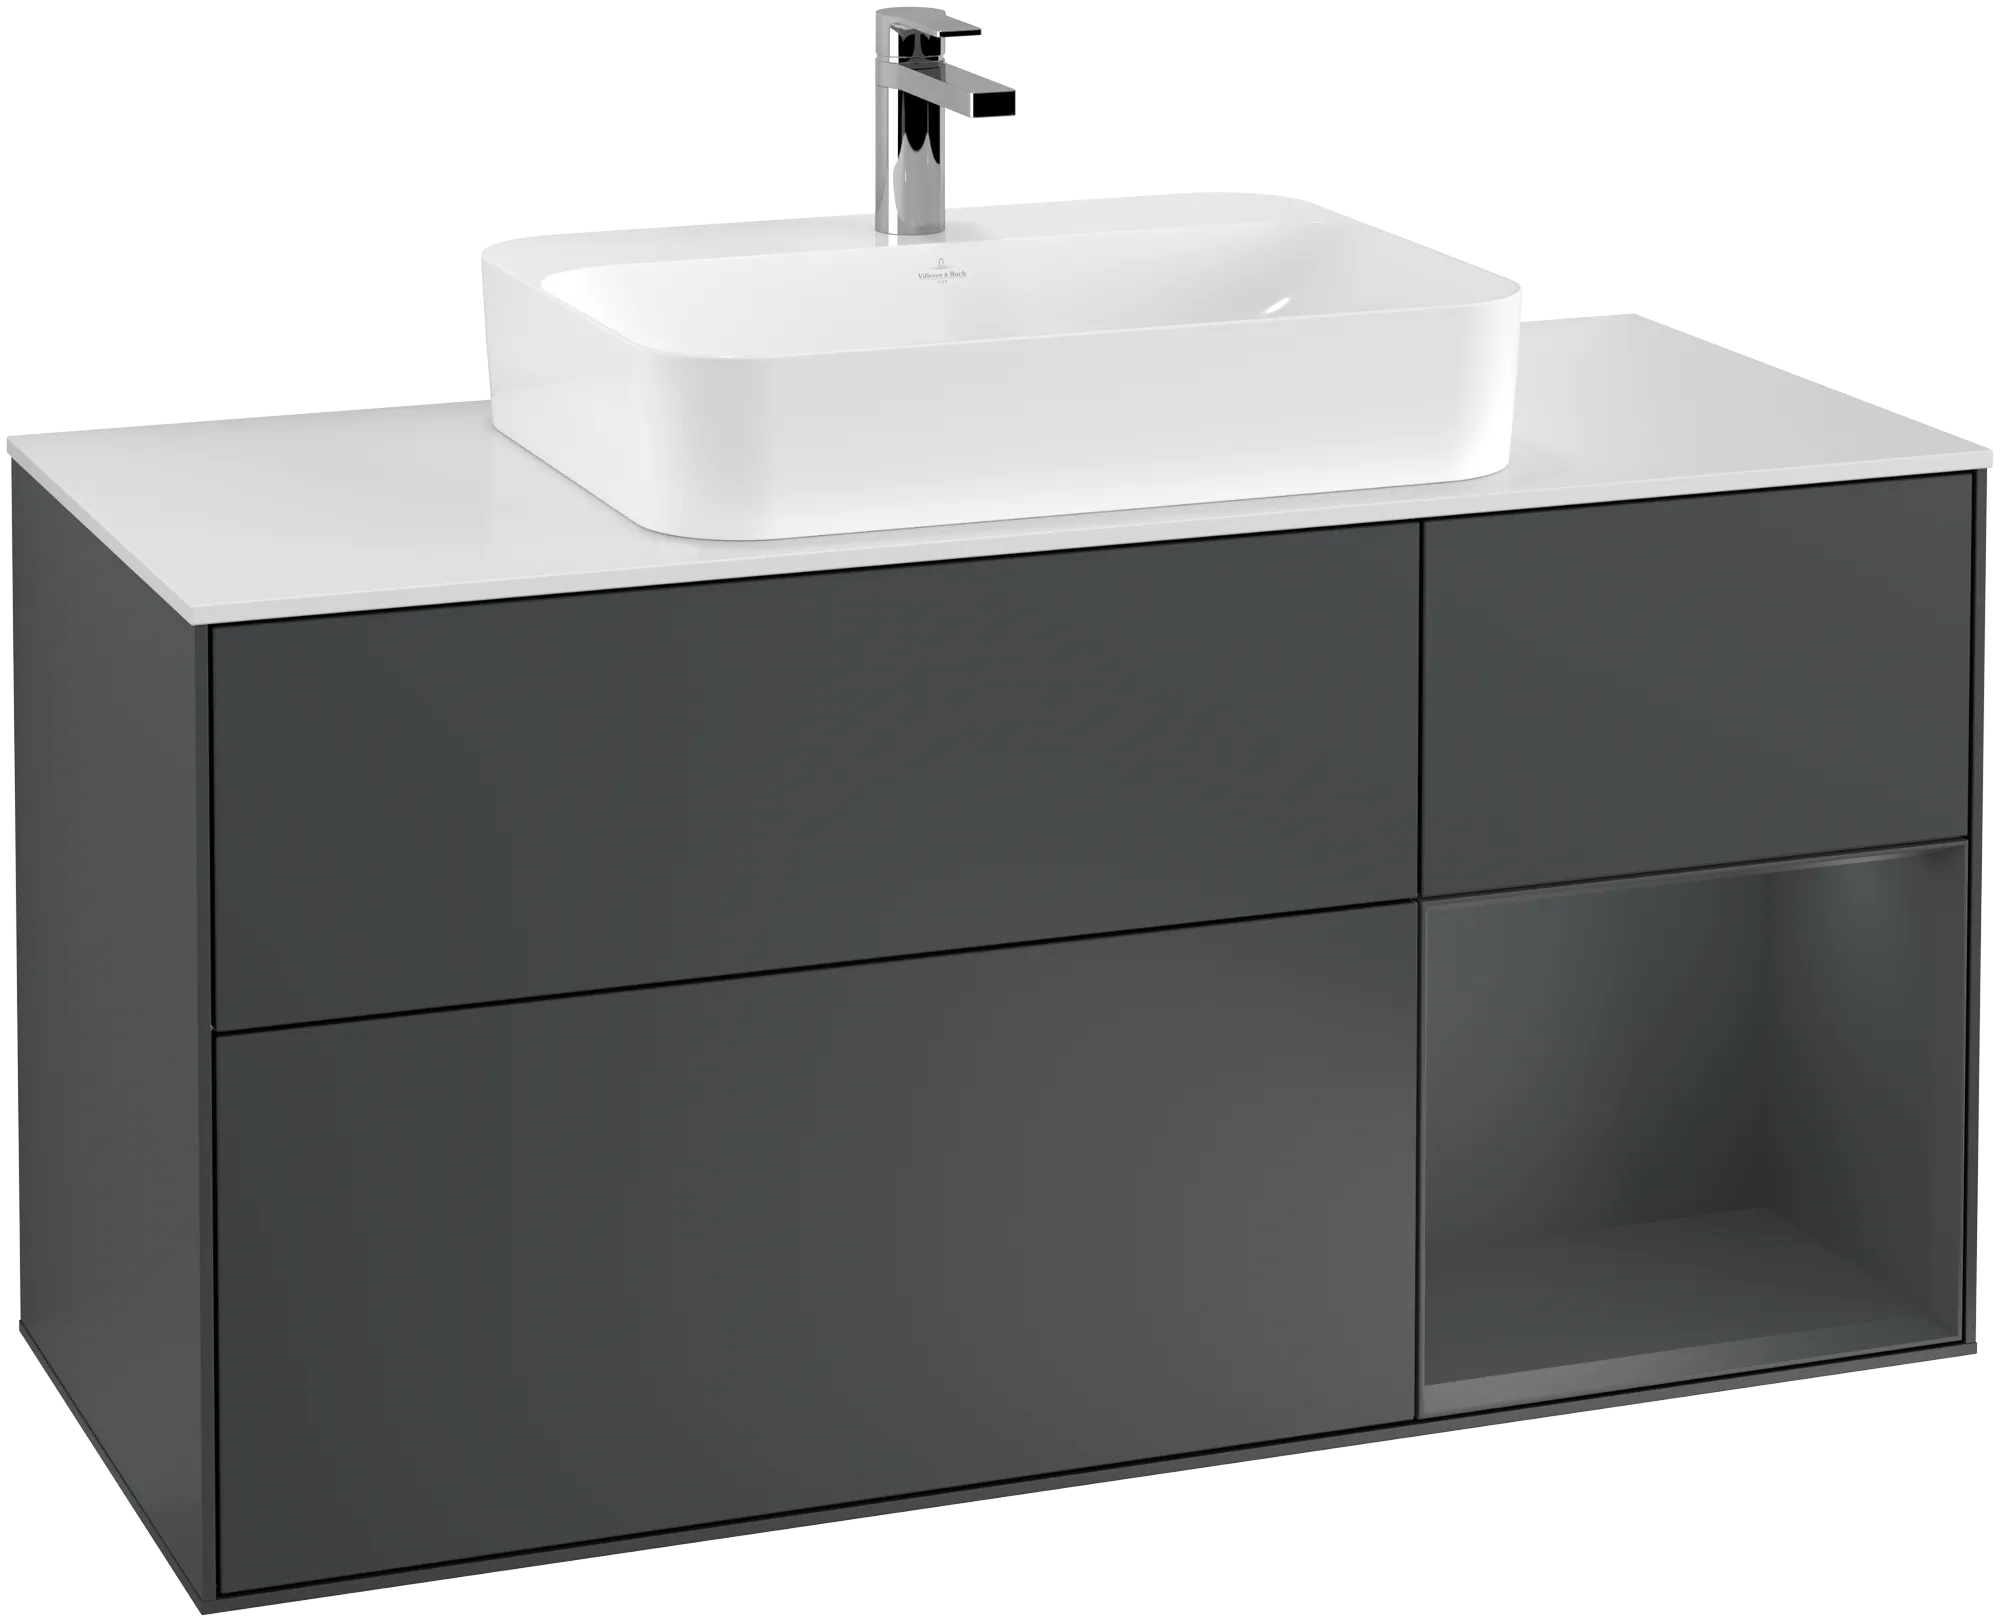 VILLEROY BOCH Finion Vanity unit, with lighting, 3 pull-out compartments, 1200 x 603 x 501 mm, Midnight Blue Matt Lacquer / Midnight Blue Matt Lacquer / Glass White Matt #G421HGHG resmi